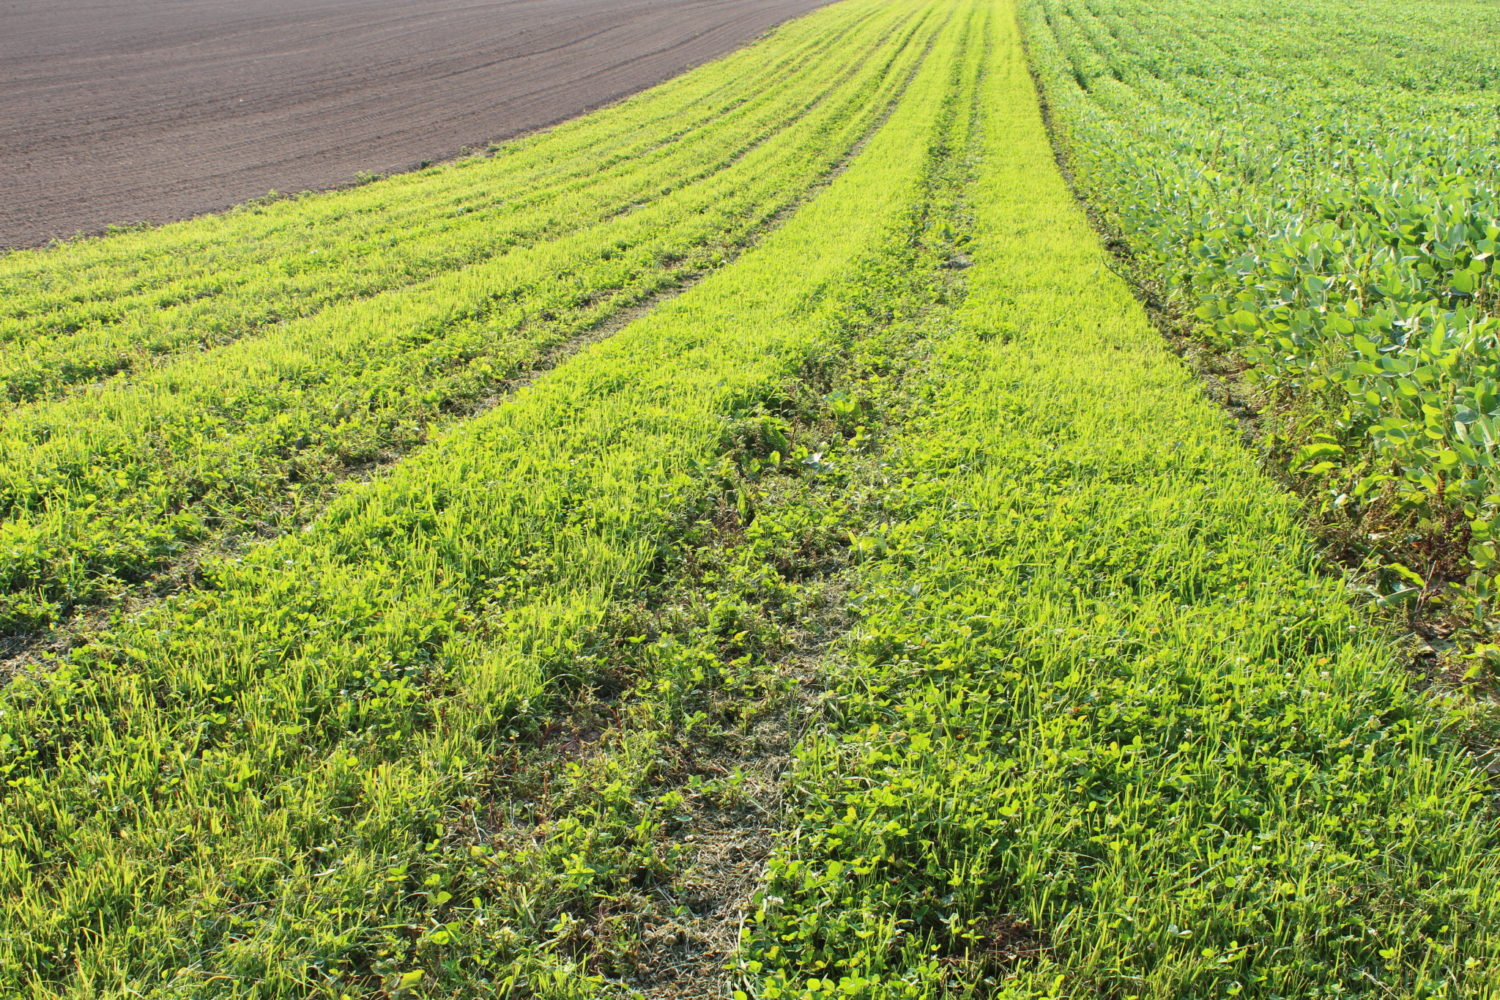 Winter Cover Crops Could Reduce Nitrogen in Illinois Drainage Water by 30%